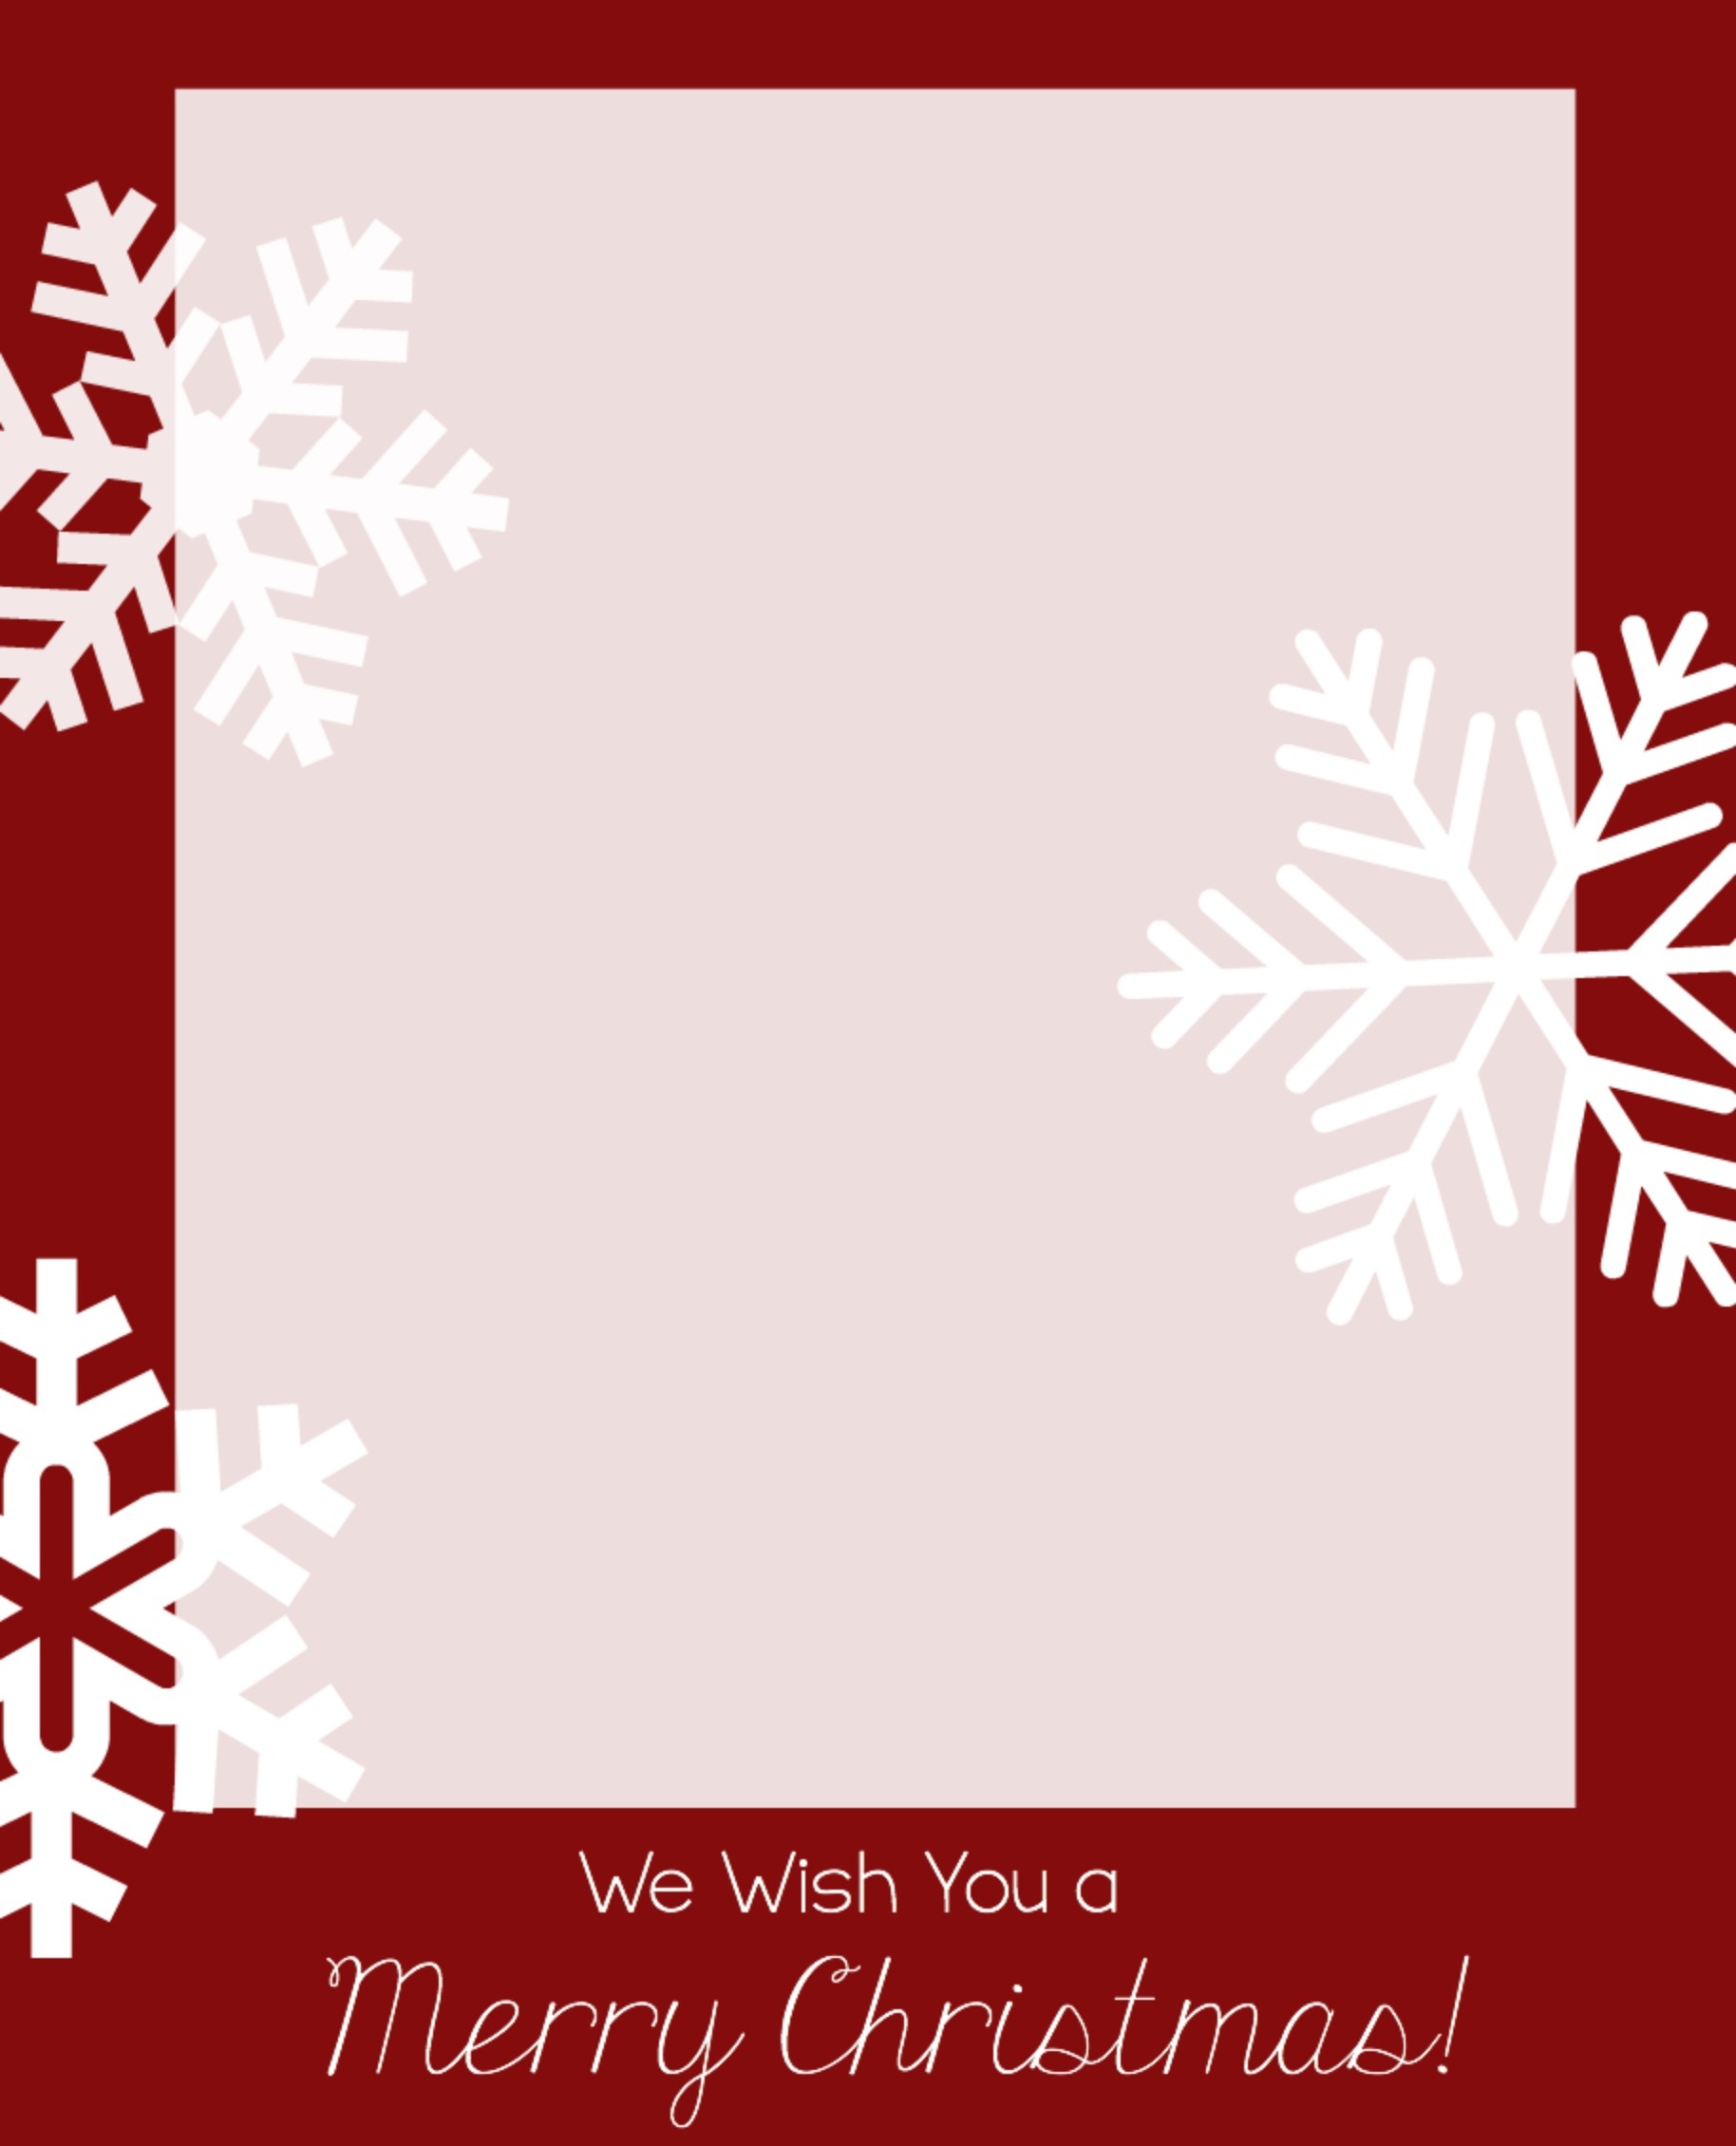 Free Christmas Card Templates - Crazy Little Projects - Free Printable Photo Christmas Cards